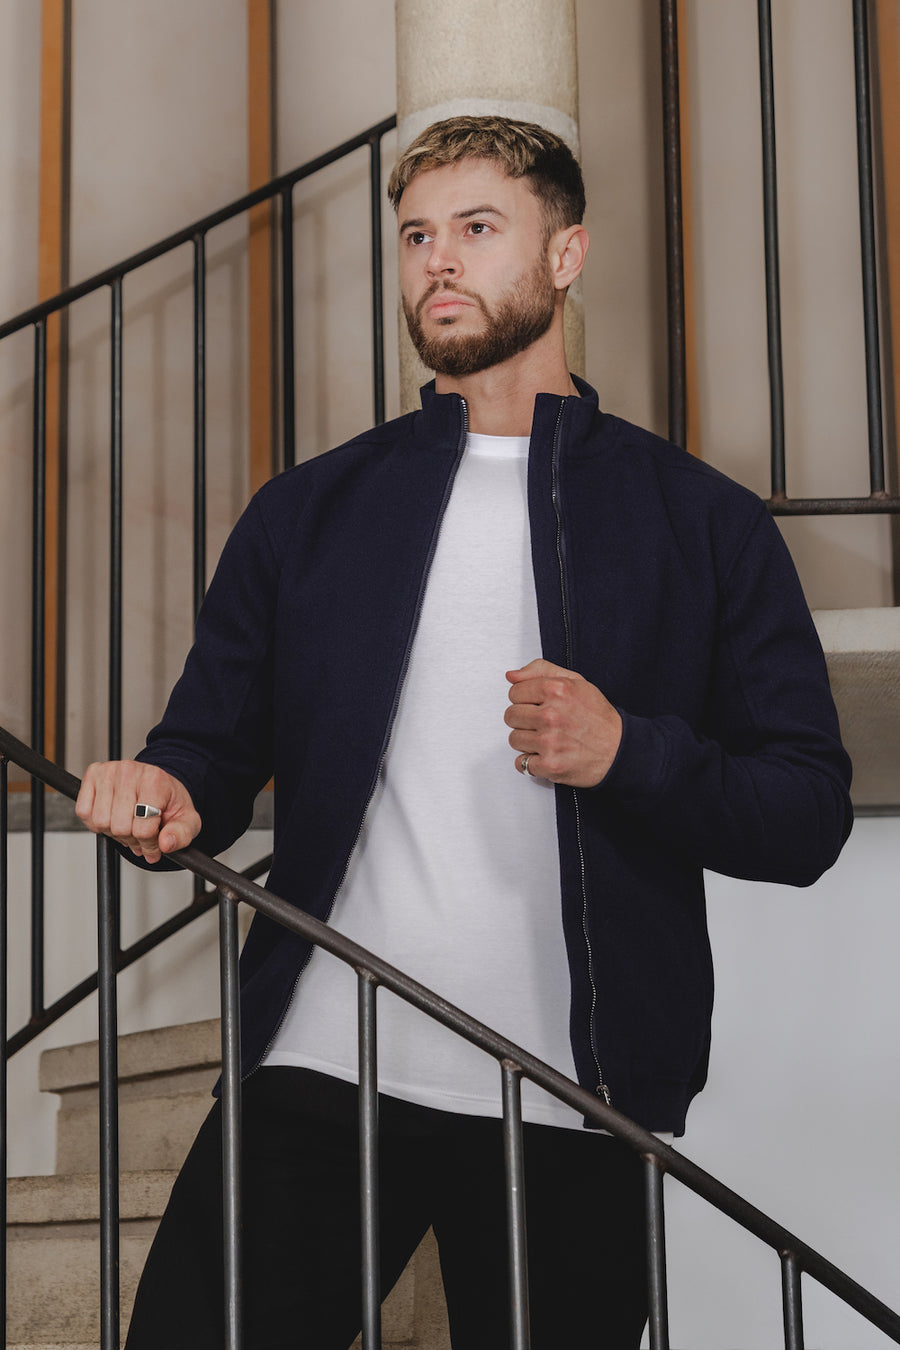 Wool Look Bomber Jacket in Navy - TAILORED ATHLETE - USA